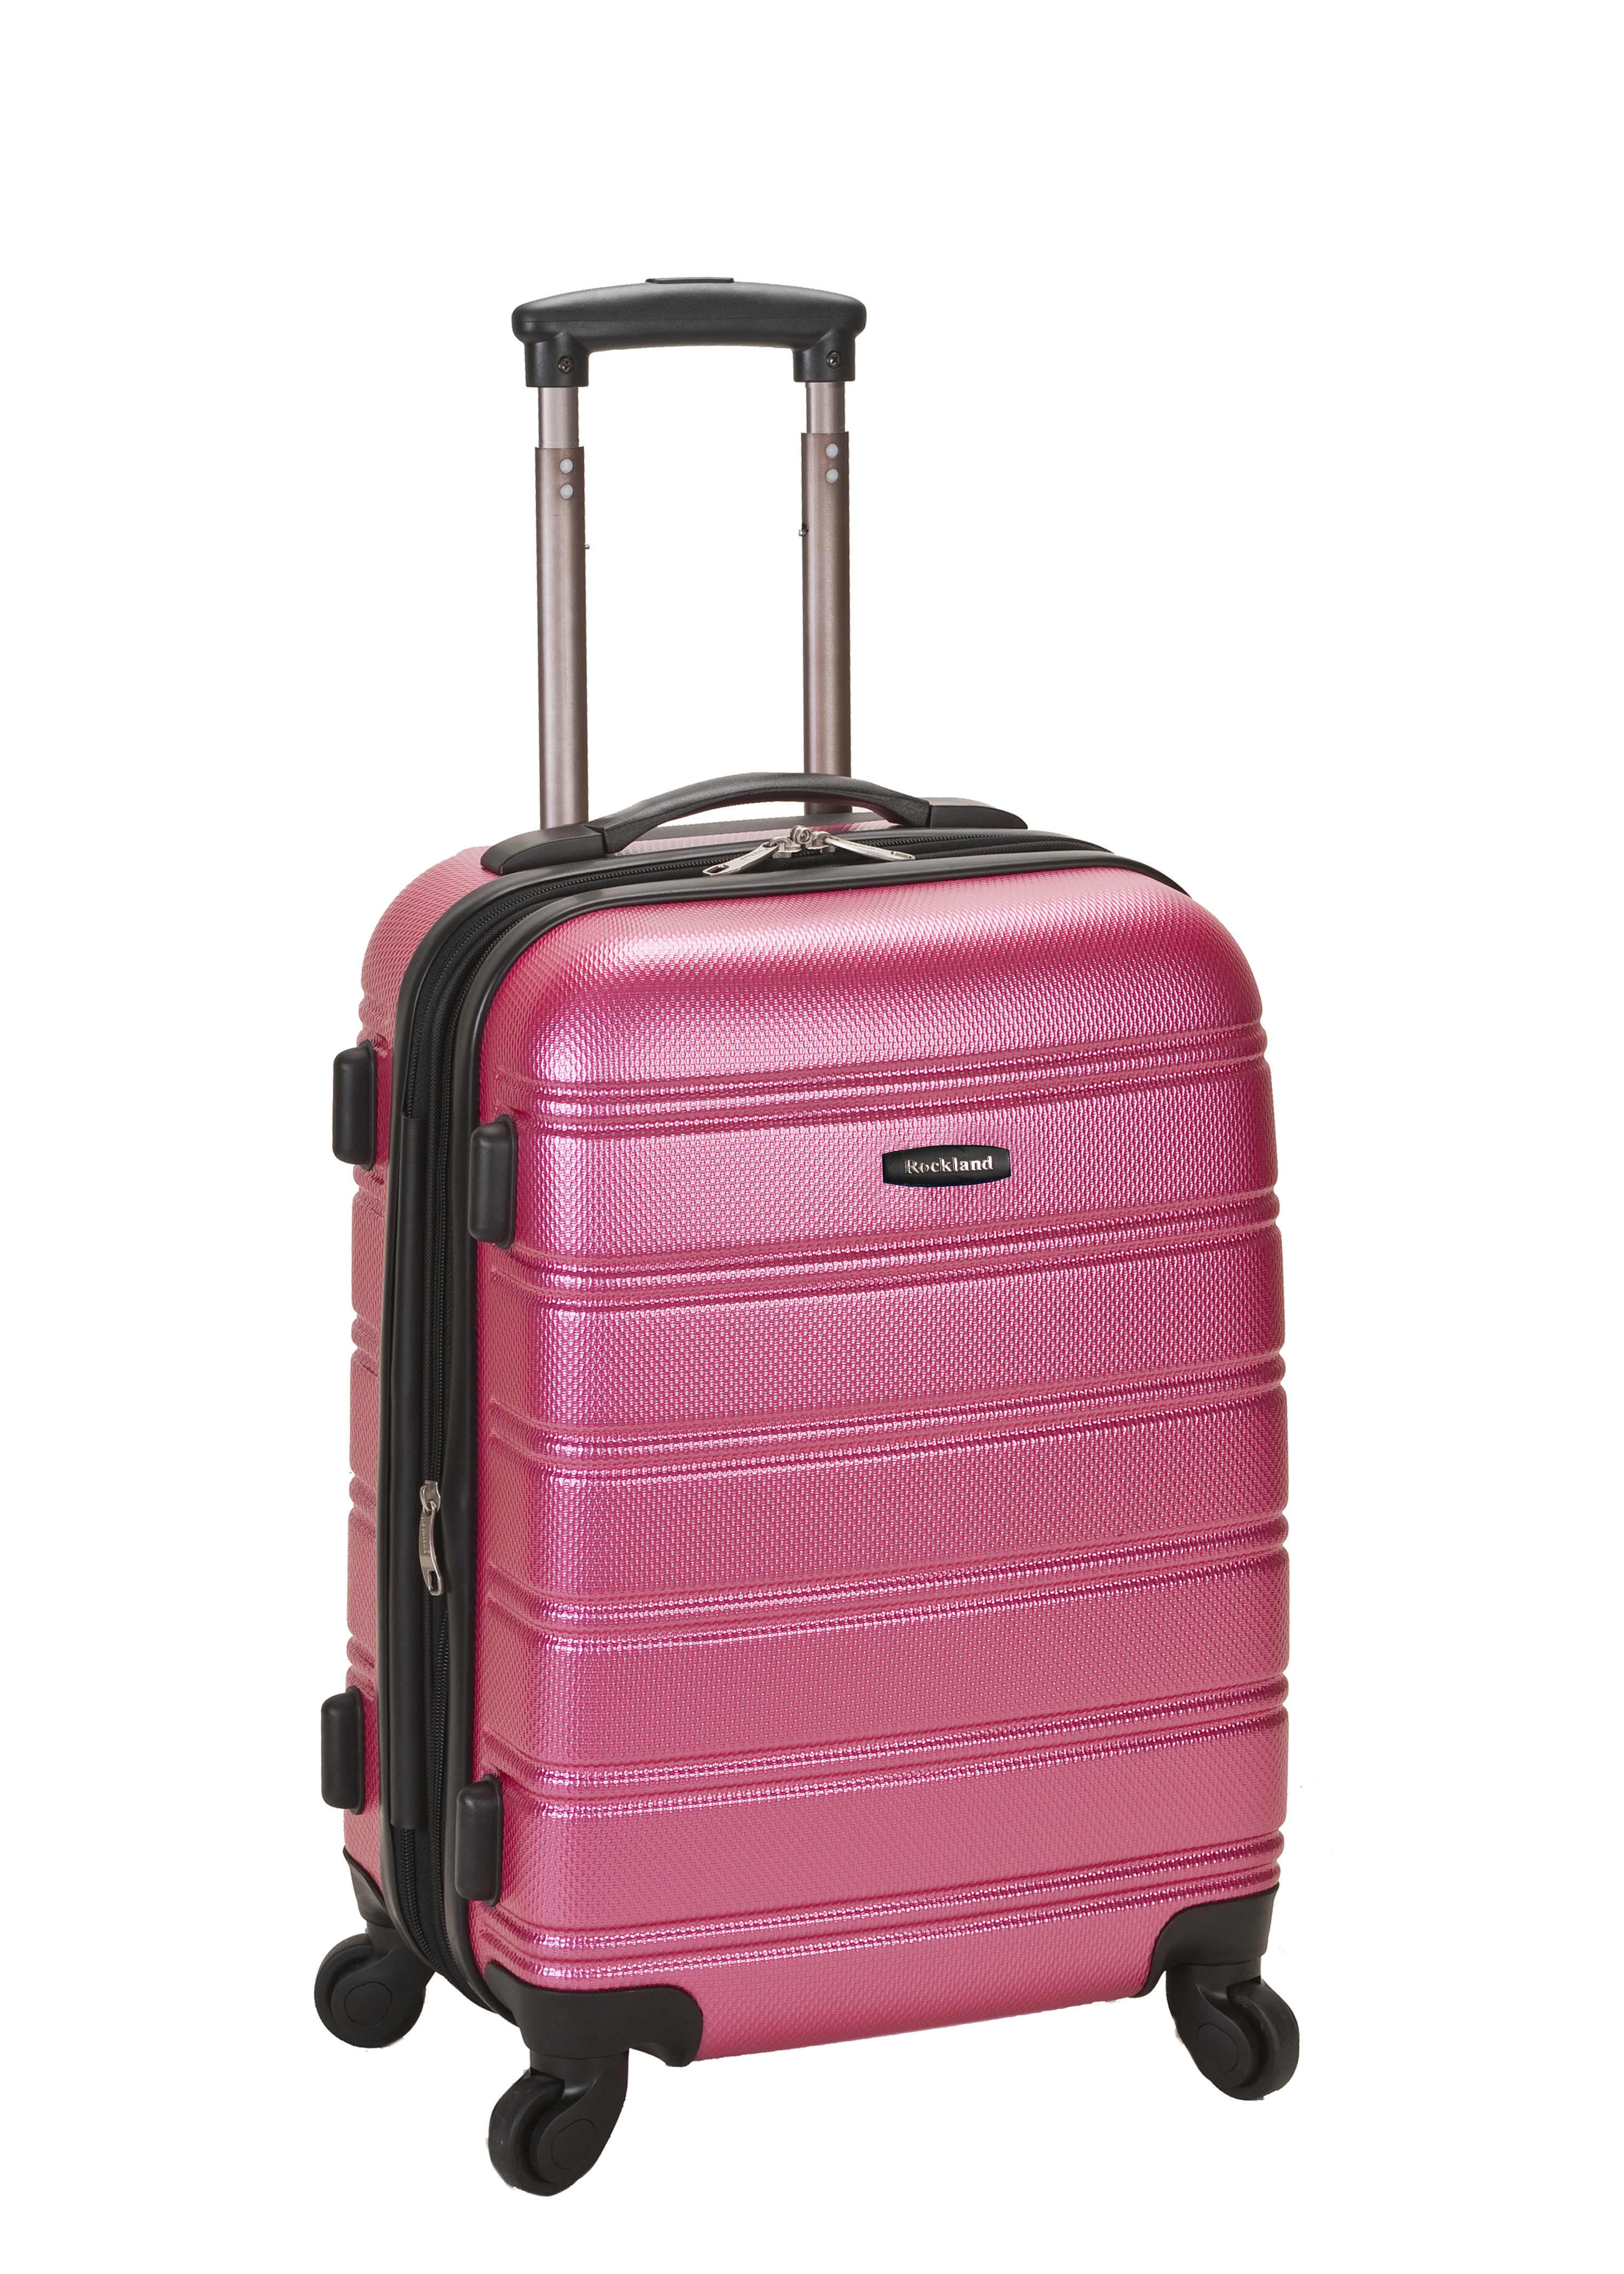 Rockland Melbourne 20" Expandable ABS Carry On